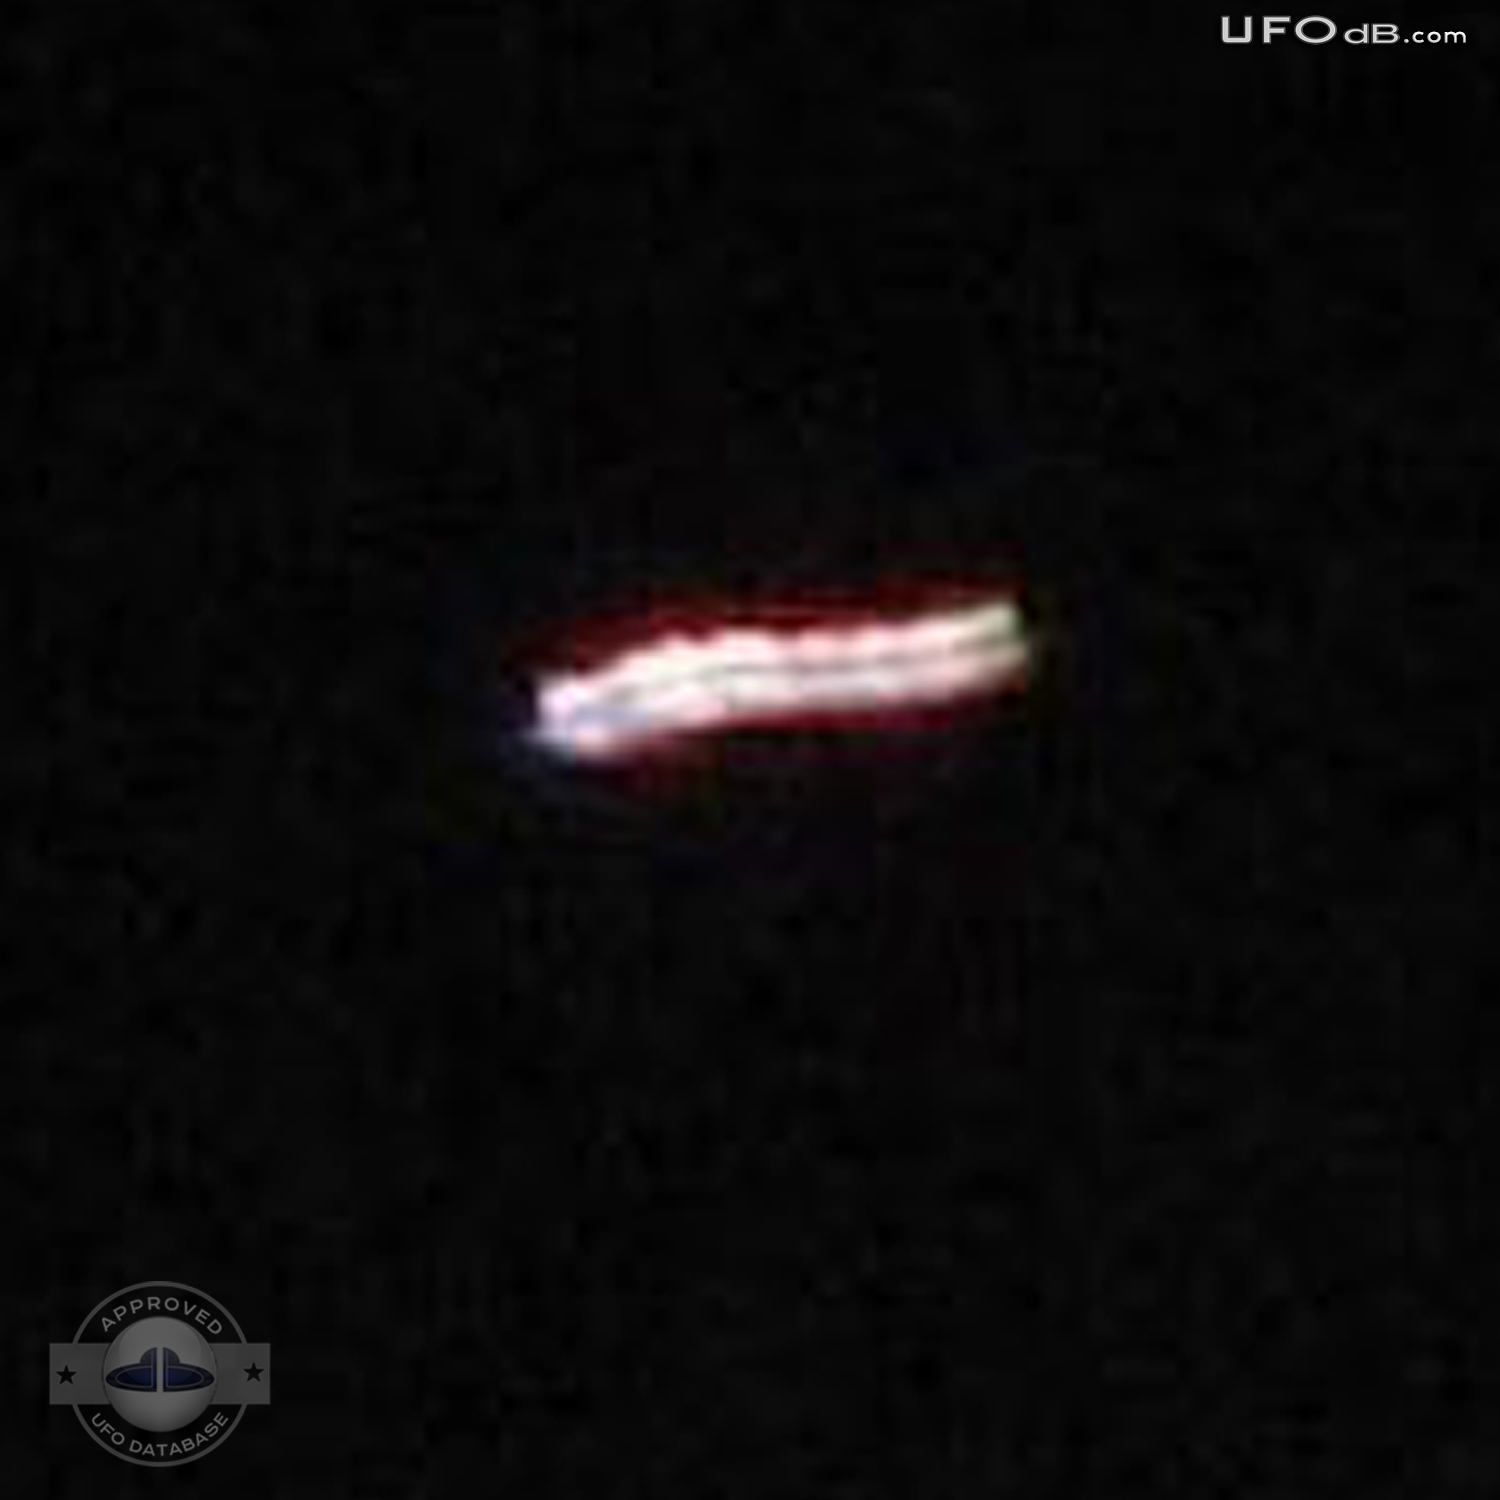 Bouncing UFO seen during Eclipse in Dominican Republic | December 2010 UFO Picture #313-4